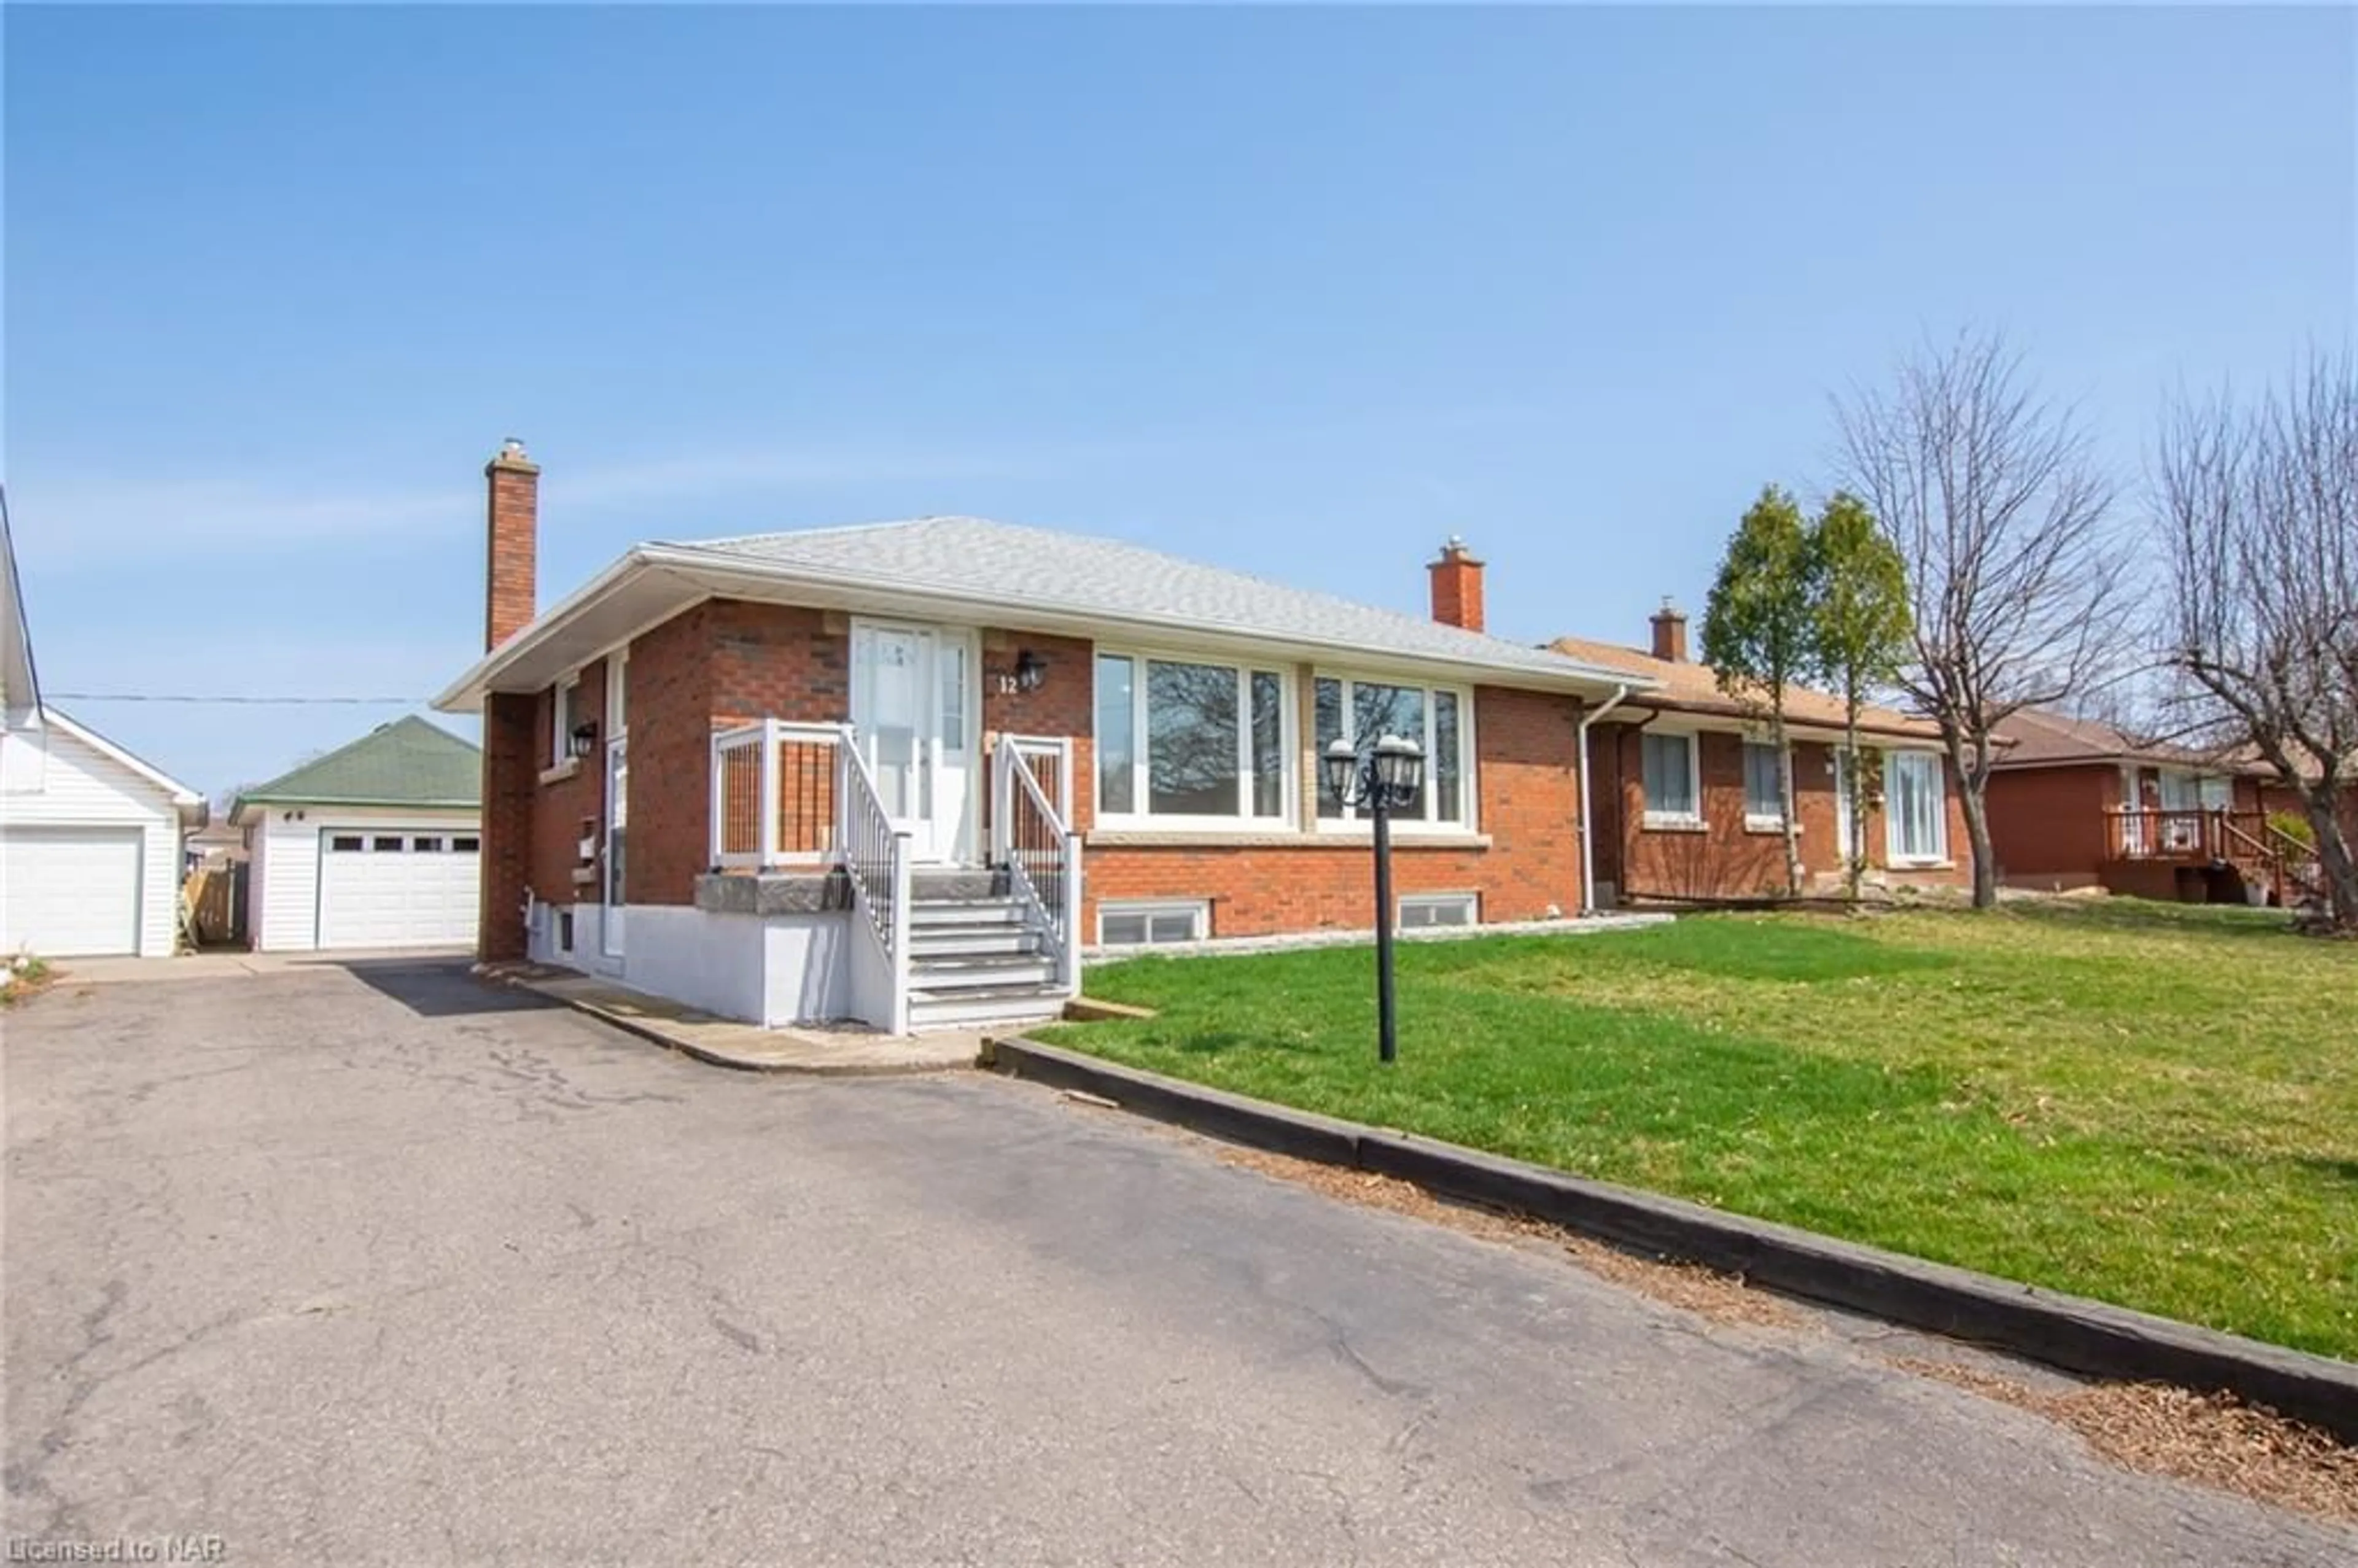 Home with brick exterior material for 12 Milton Rd, St. Catharines Ontario L2P 3E8